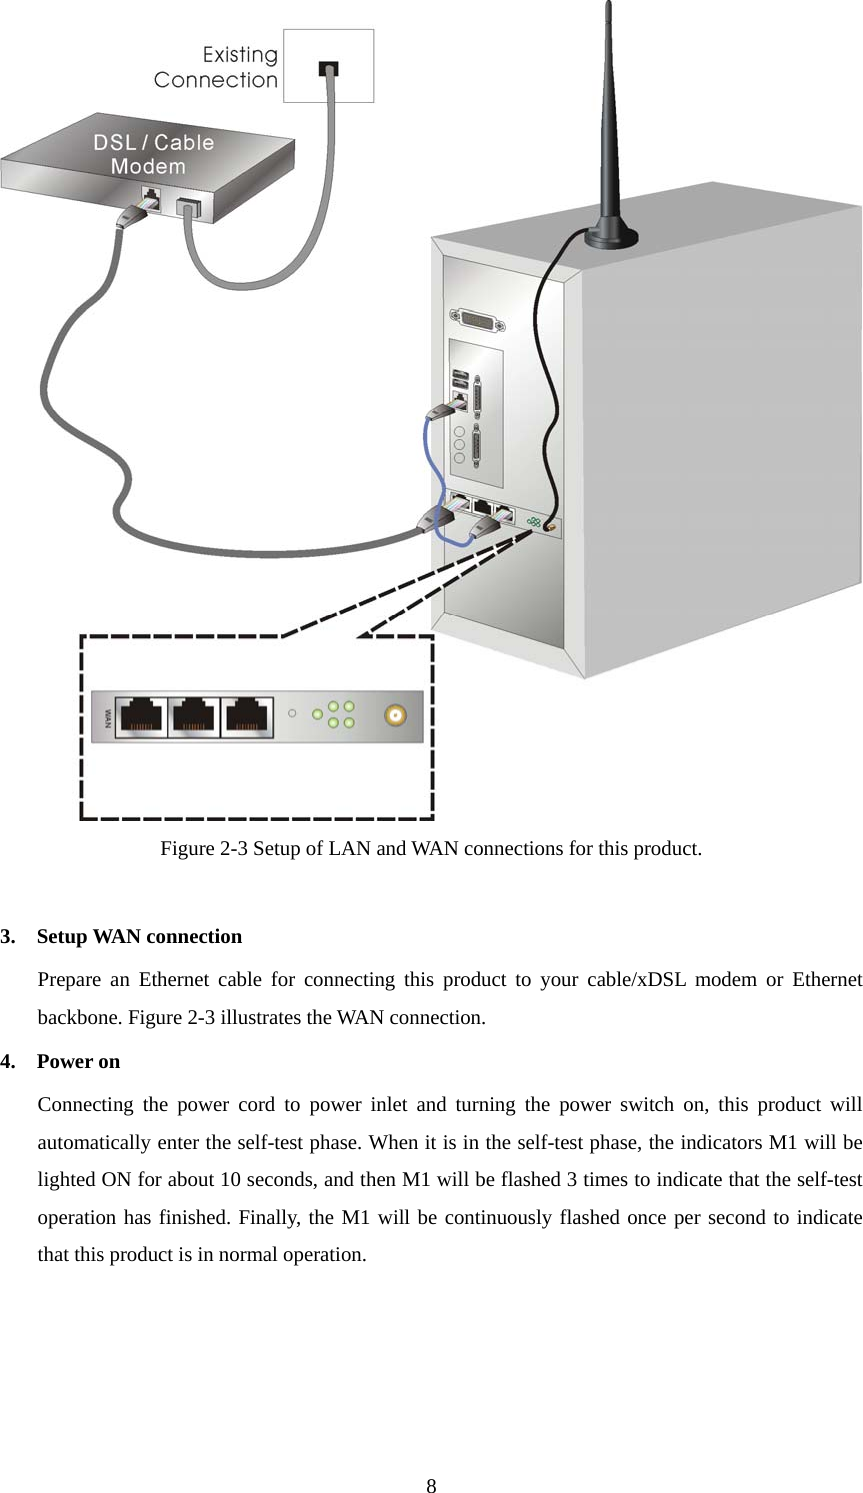  8 Figure 2-3 Setup of LAN and WAN connections for this product.  3.  Setup WAN connection Prepare an Ethernet cable for connecting this product to your cable/xDSL modem or Ethernet backbone. Figure 2-3 illustrates the WAN connection. 4.  Power on  Connecting the power cord to power inlet and turning the power switch on, this product will automatically enter the self-test phase. When it is in the self-test phase, the indicators M1 will be lighted ON for about 10 seconds, and then M1 will be flashed 3 times to indicate that the self-test operation has finished. Finally, the M1 will be continuously flashed once per second to indicate that this product is in normal operation.    